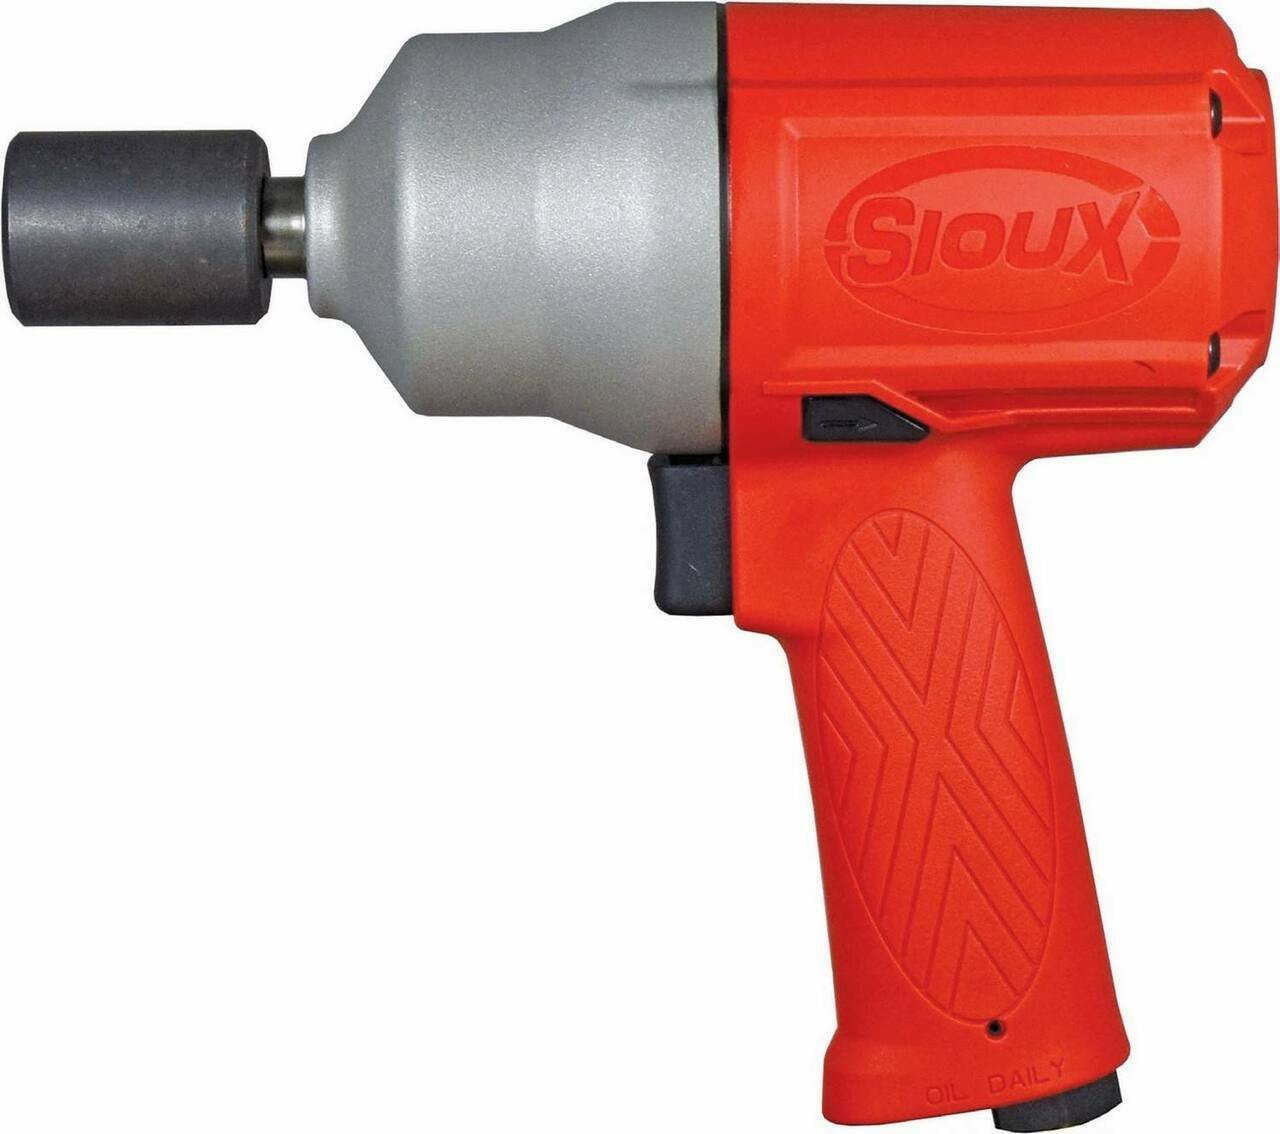 Sioux Tools IW500MP-4P 1/2" Impact Wrench | 9400 RPM | 5/8" Bolt Cap